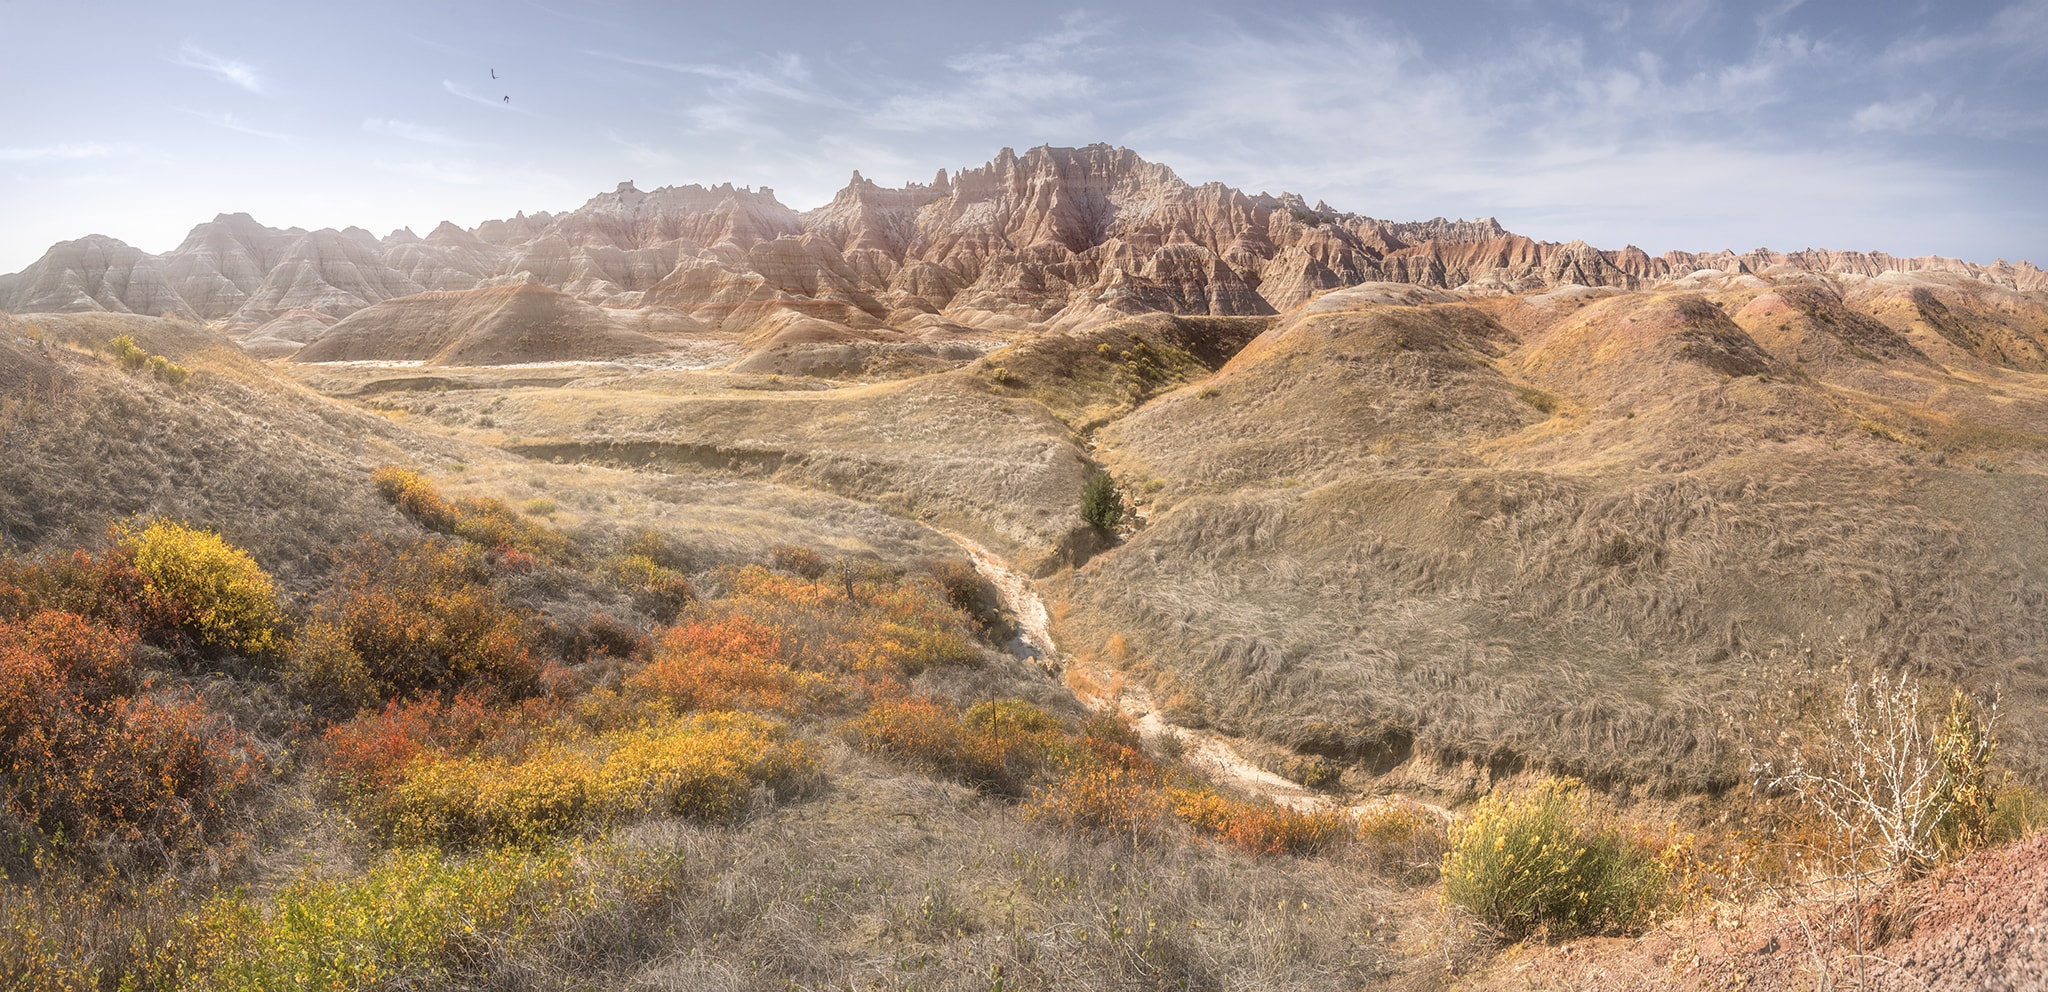 Fall foliage in the Badlands